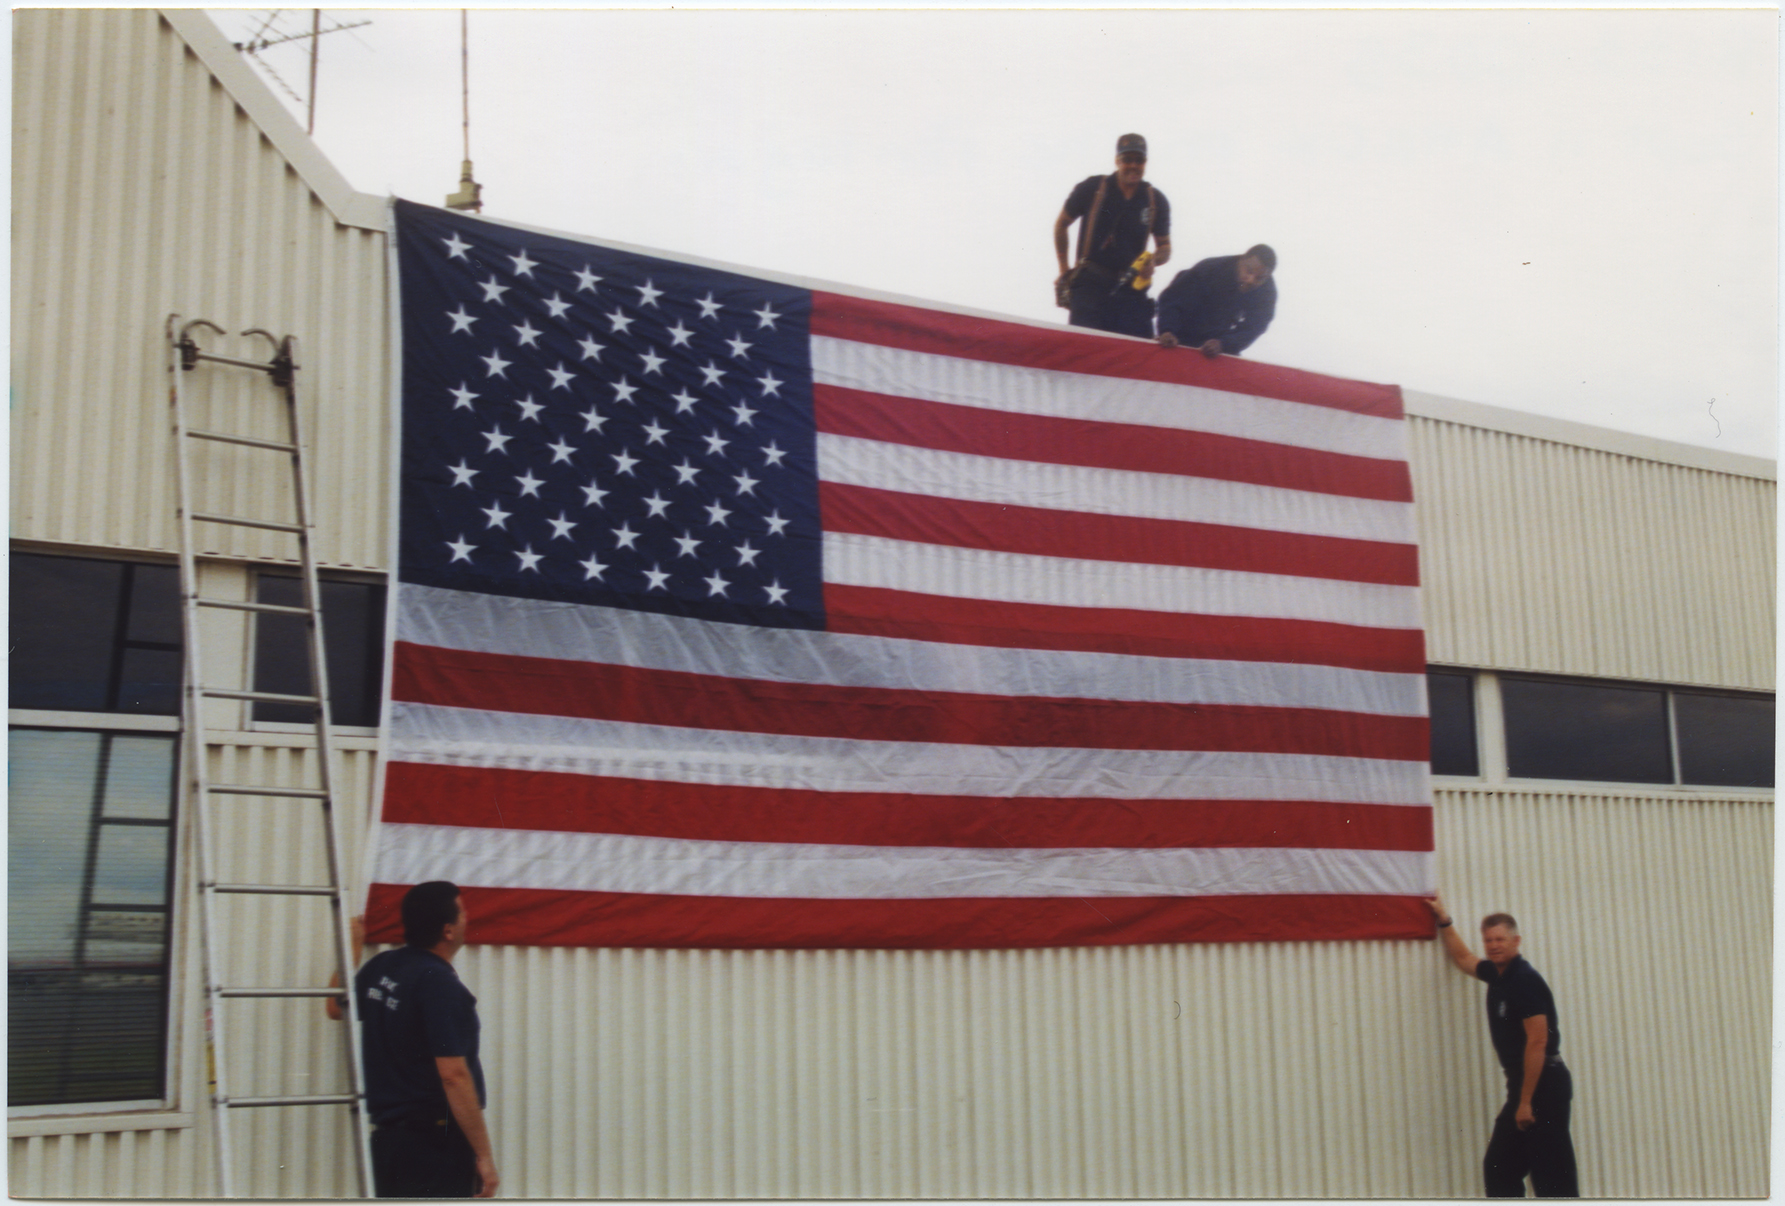 Fire fighters display a large American flag on the front of the National Airport fire station, two days after the 9/11 attack on the Pentagon. 2001, 1 print, col., 4 x 6 in..